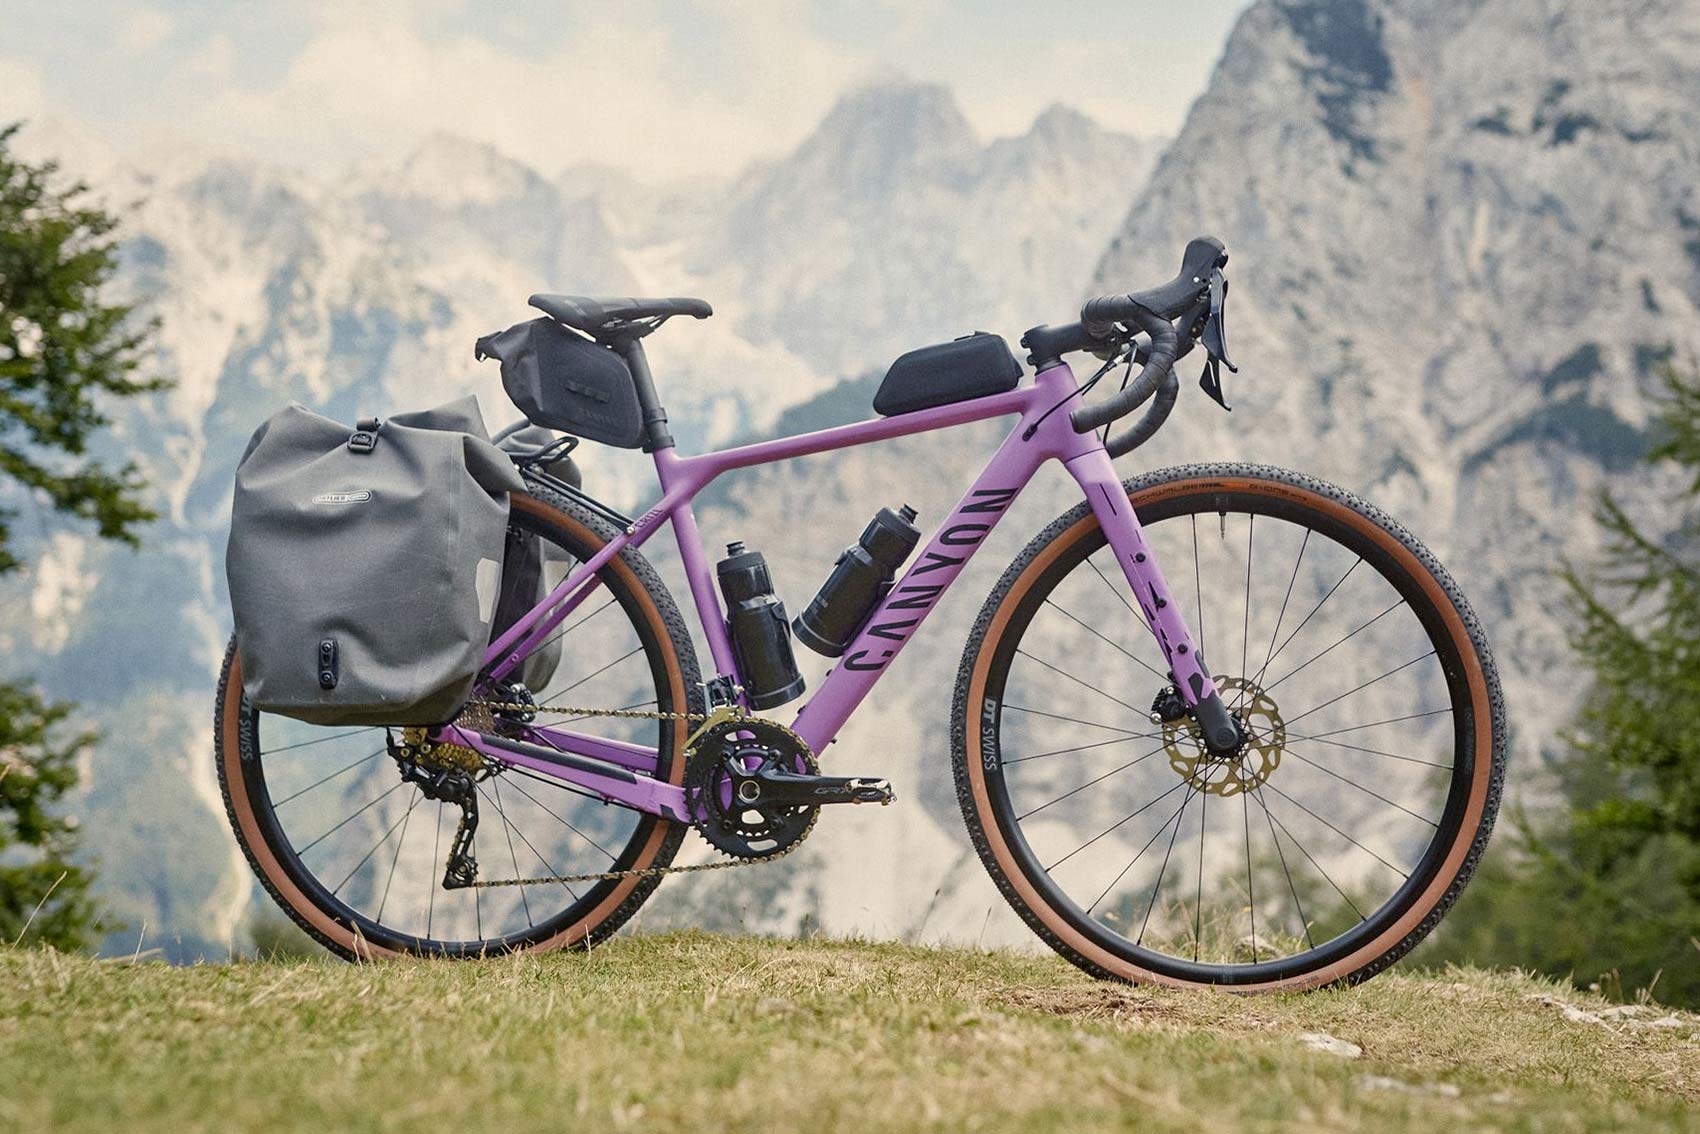 Canyon Grizl AL affordable alloy adventure gravel bike, photo by Marco Freudenreich, complete